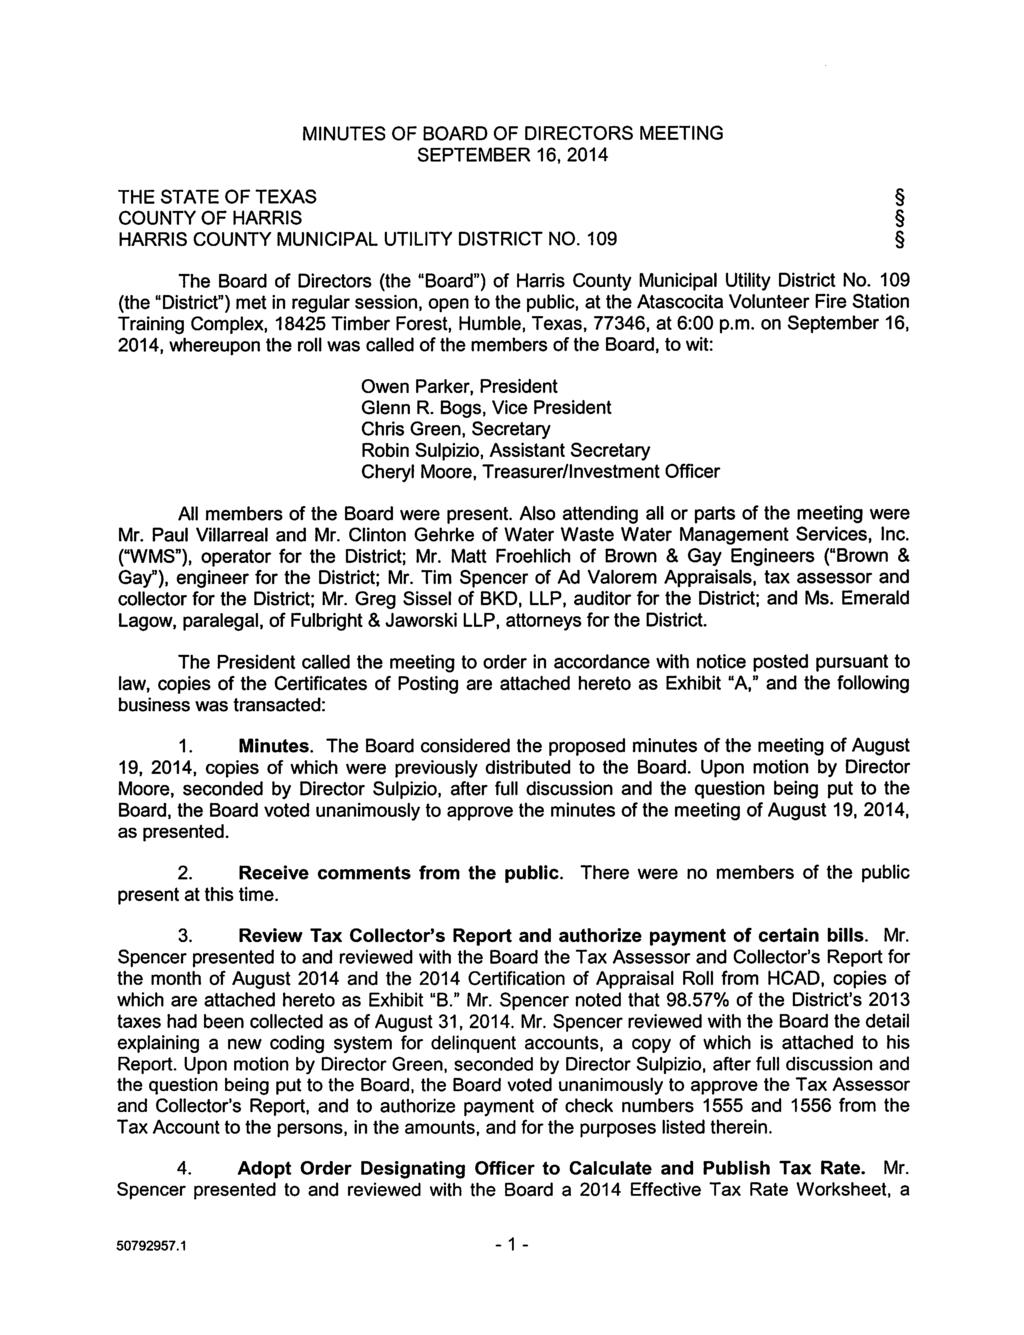 MINUTES OF BOARD OF DIRECTORS MEETING SEPTEMBER 16, 2014 THE STATE OF TEXAS COUNTY OF HARRIS HARRIS COUNTY MUNICIPAL UTILITY DISTRICT NO.